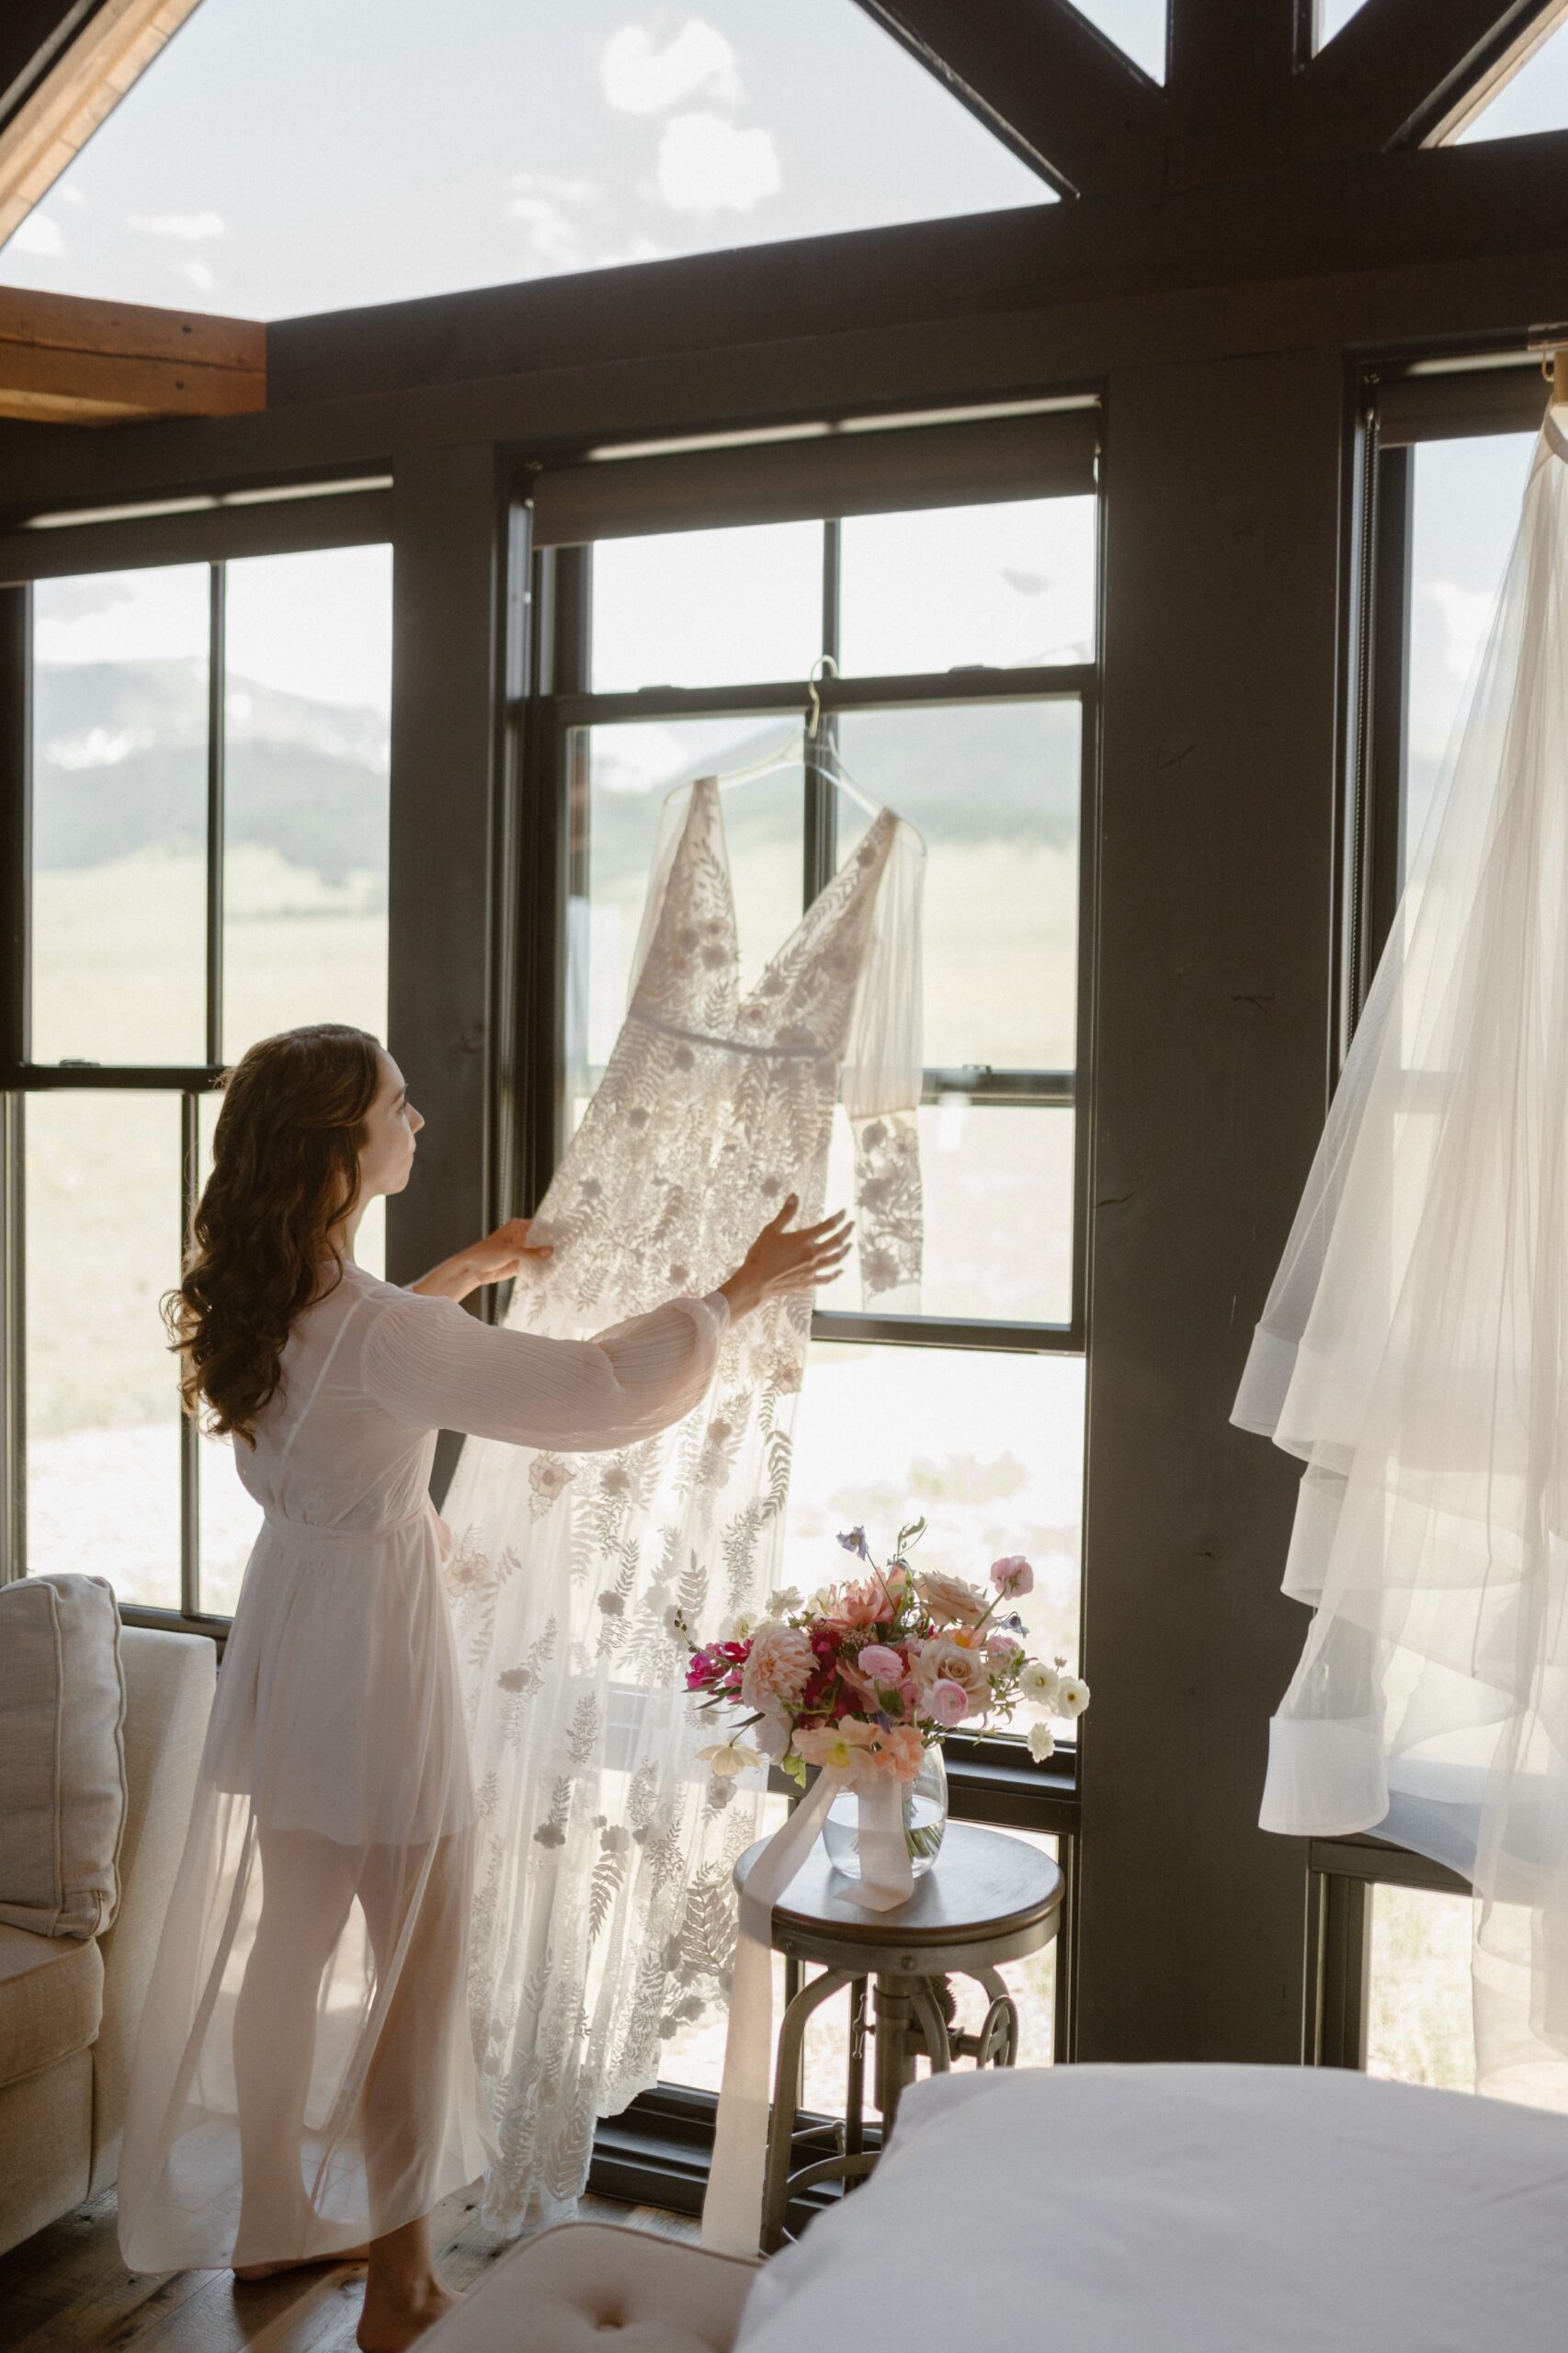 Bride Jessica displays her white wedding dress in the window at Three Peaks Ranch. Photo by Ashley Joyce.